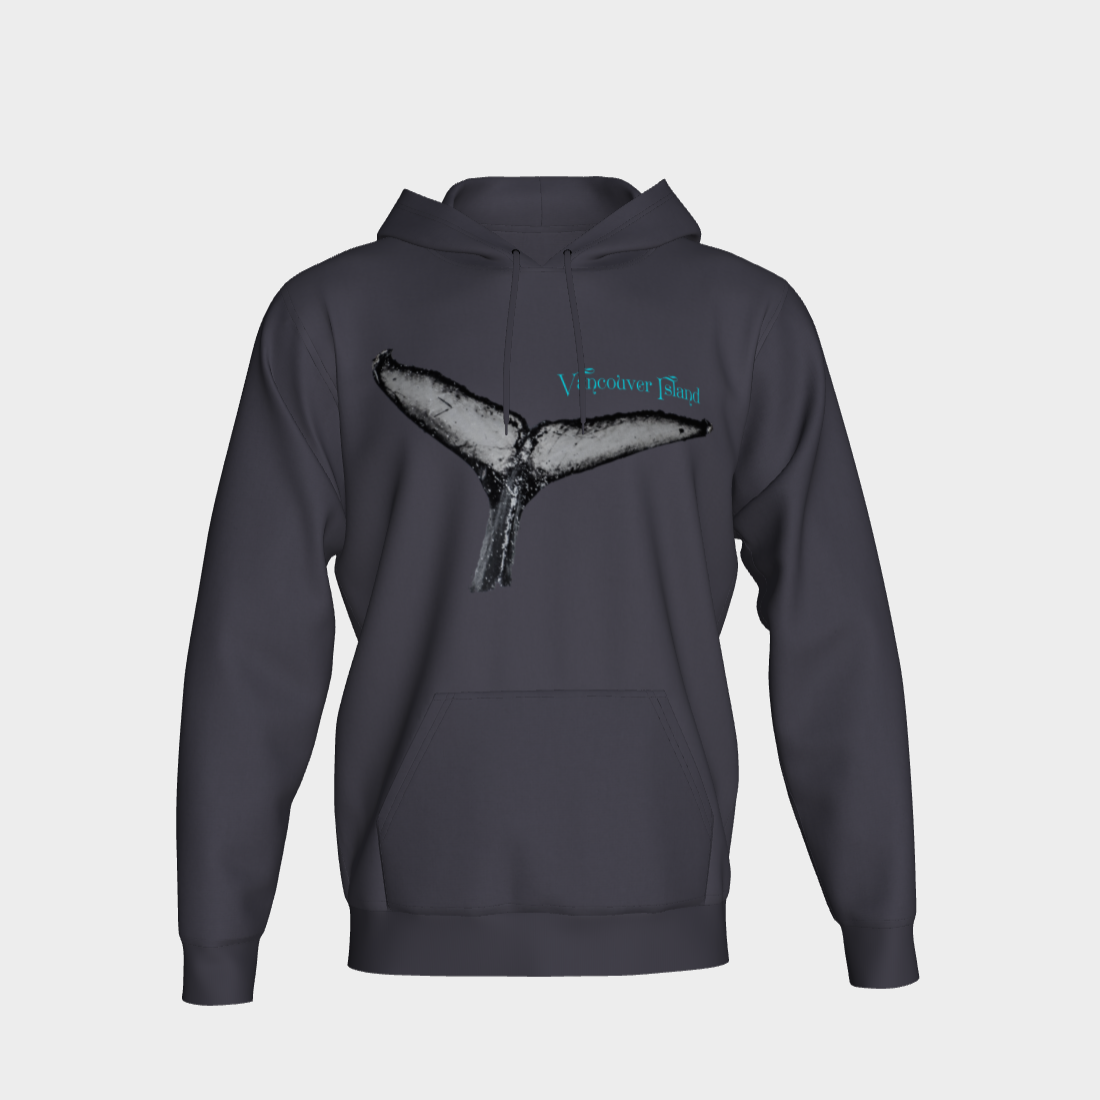 Humpback Whale Tail Vancouver Island Unisex Pullover Hoodie Your Van Isle Goddess unisex pullover hoodie is a great classic hoodie!  Created with state of the art tri-tex material which is a non-shrink poly middle encased in two layers of ultra soft cotton face and lining.